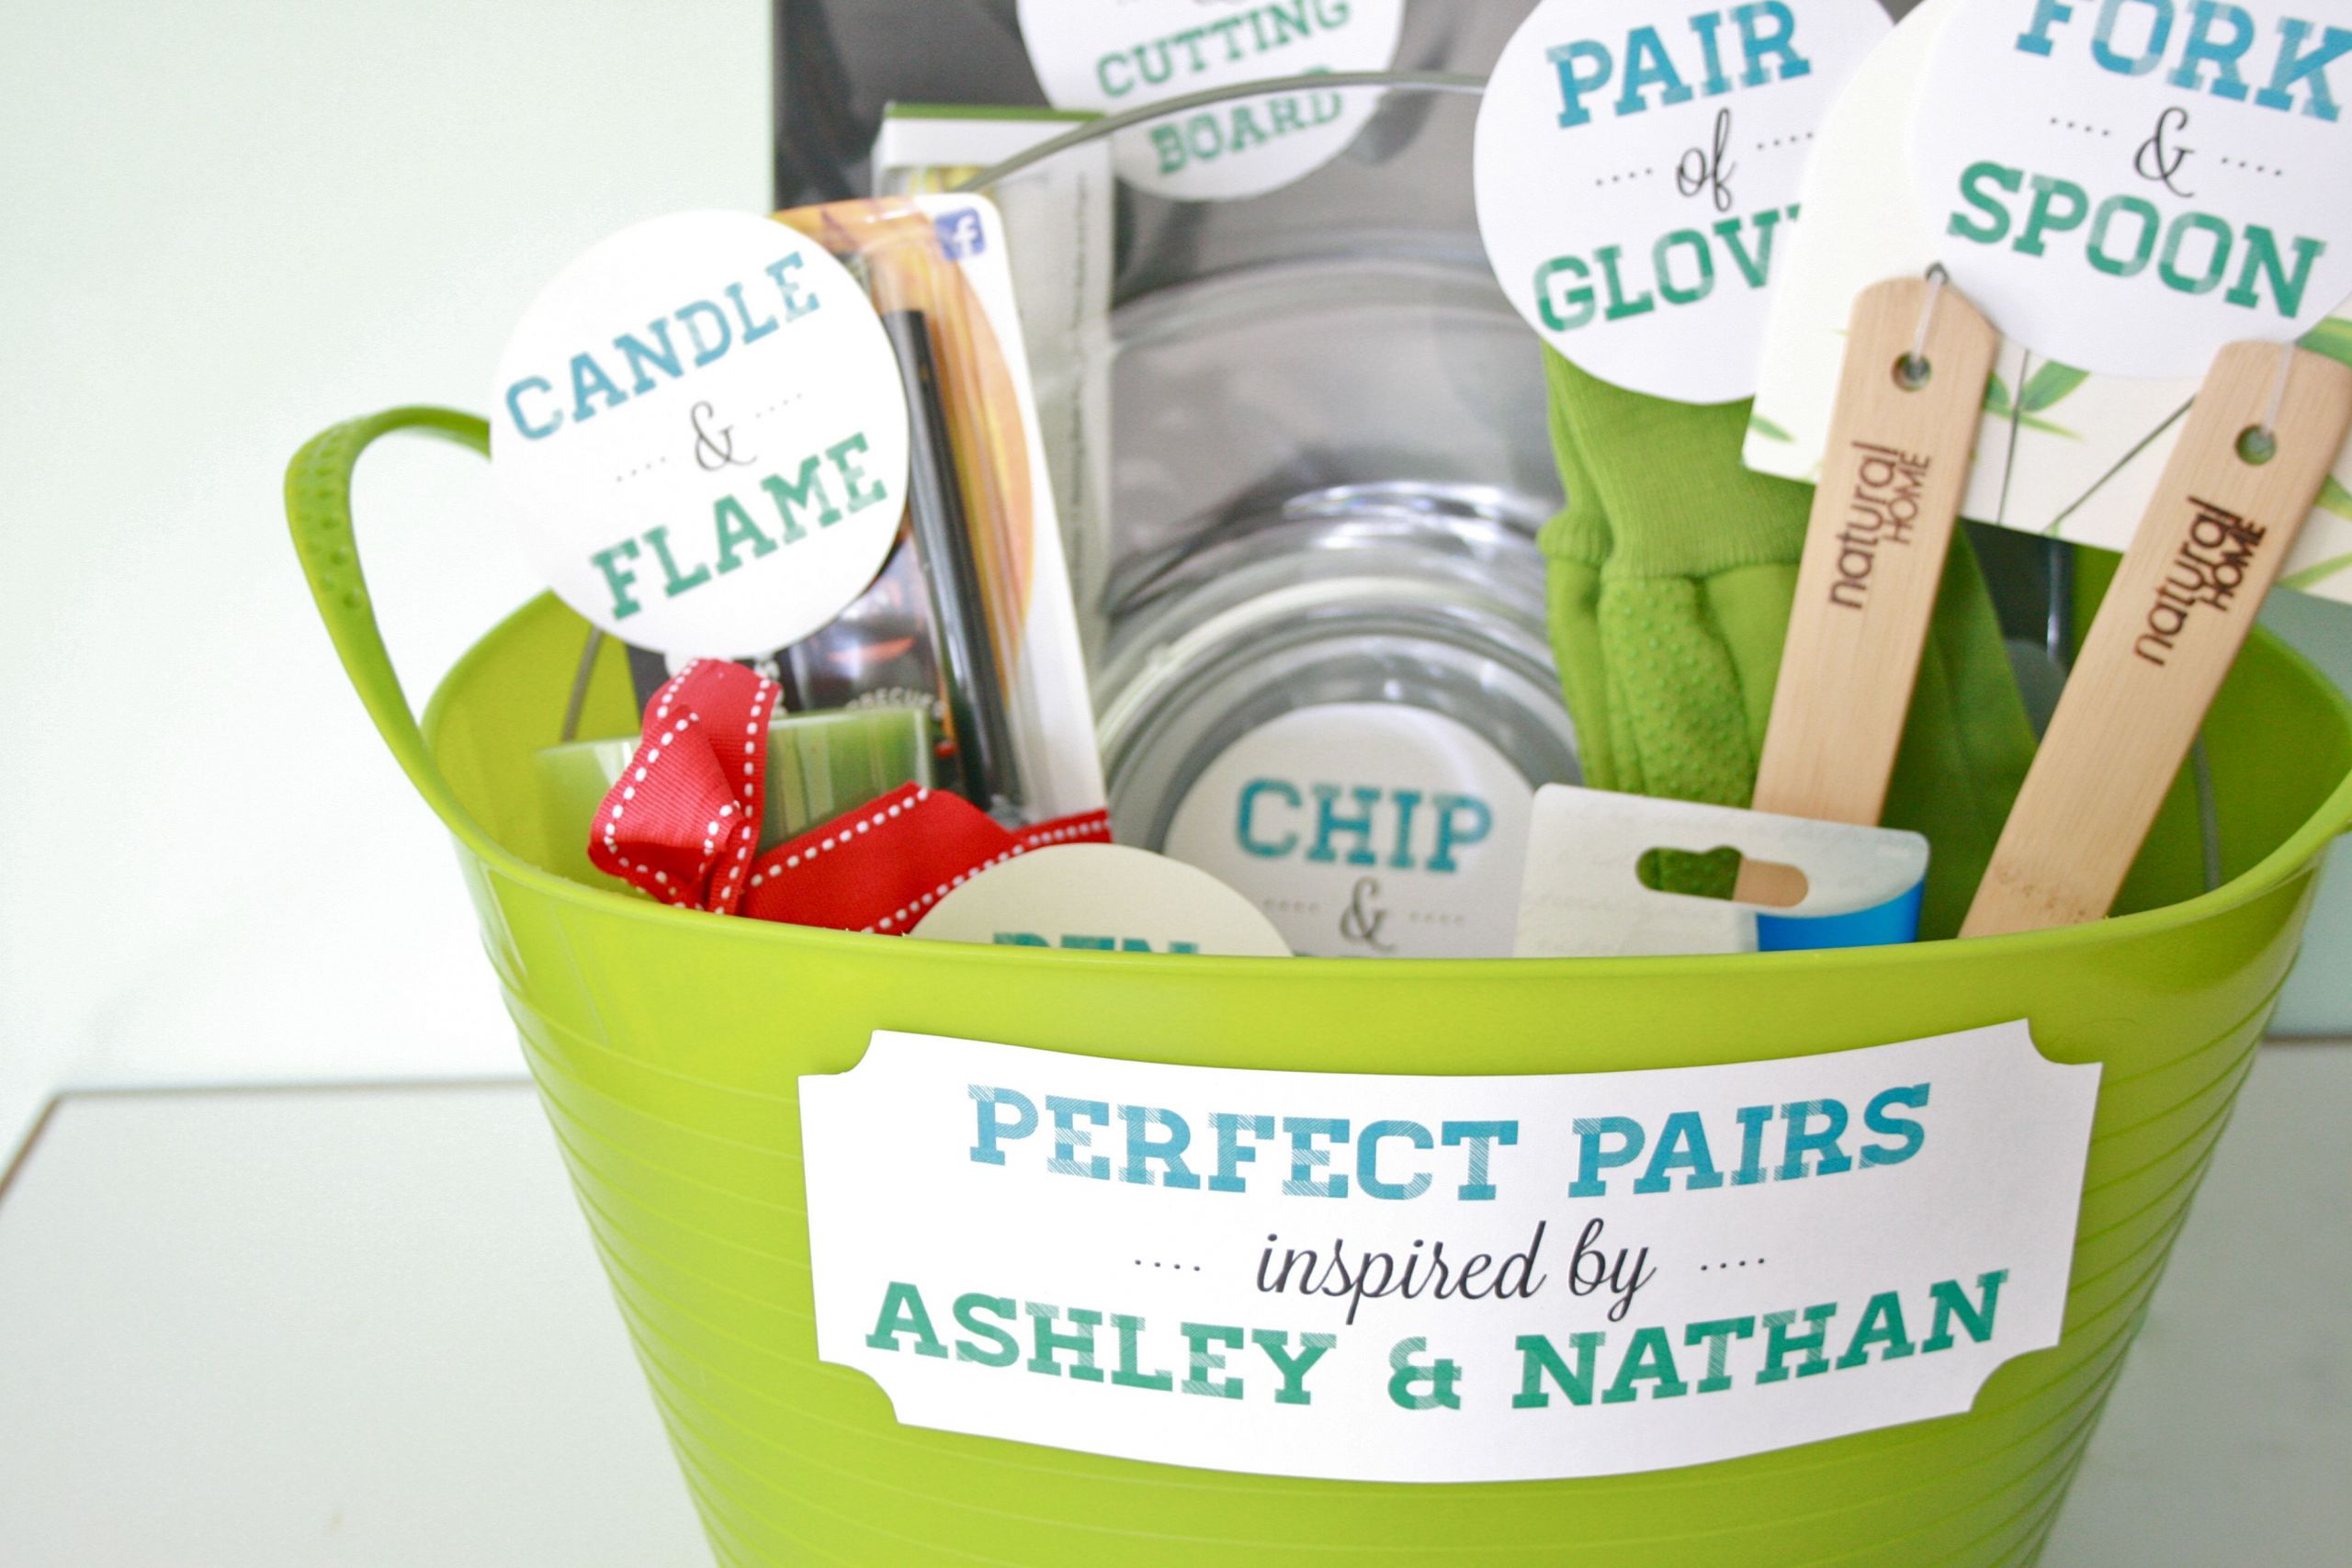 Ideas For Wedding Shower Gift
 DIY "Perfect Pairs" Bridal Shower Gift